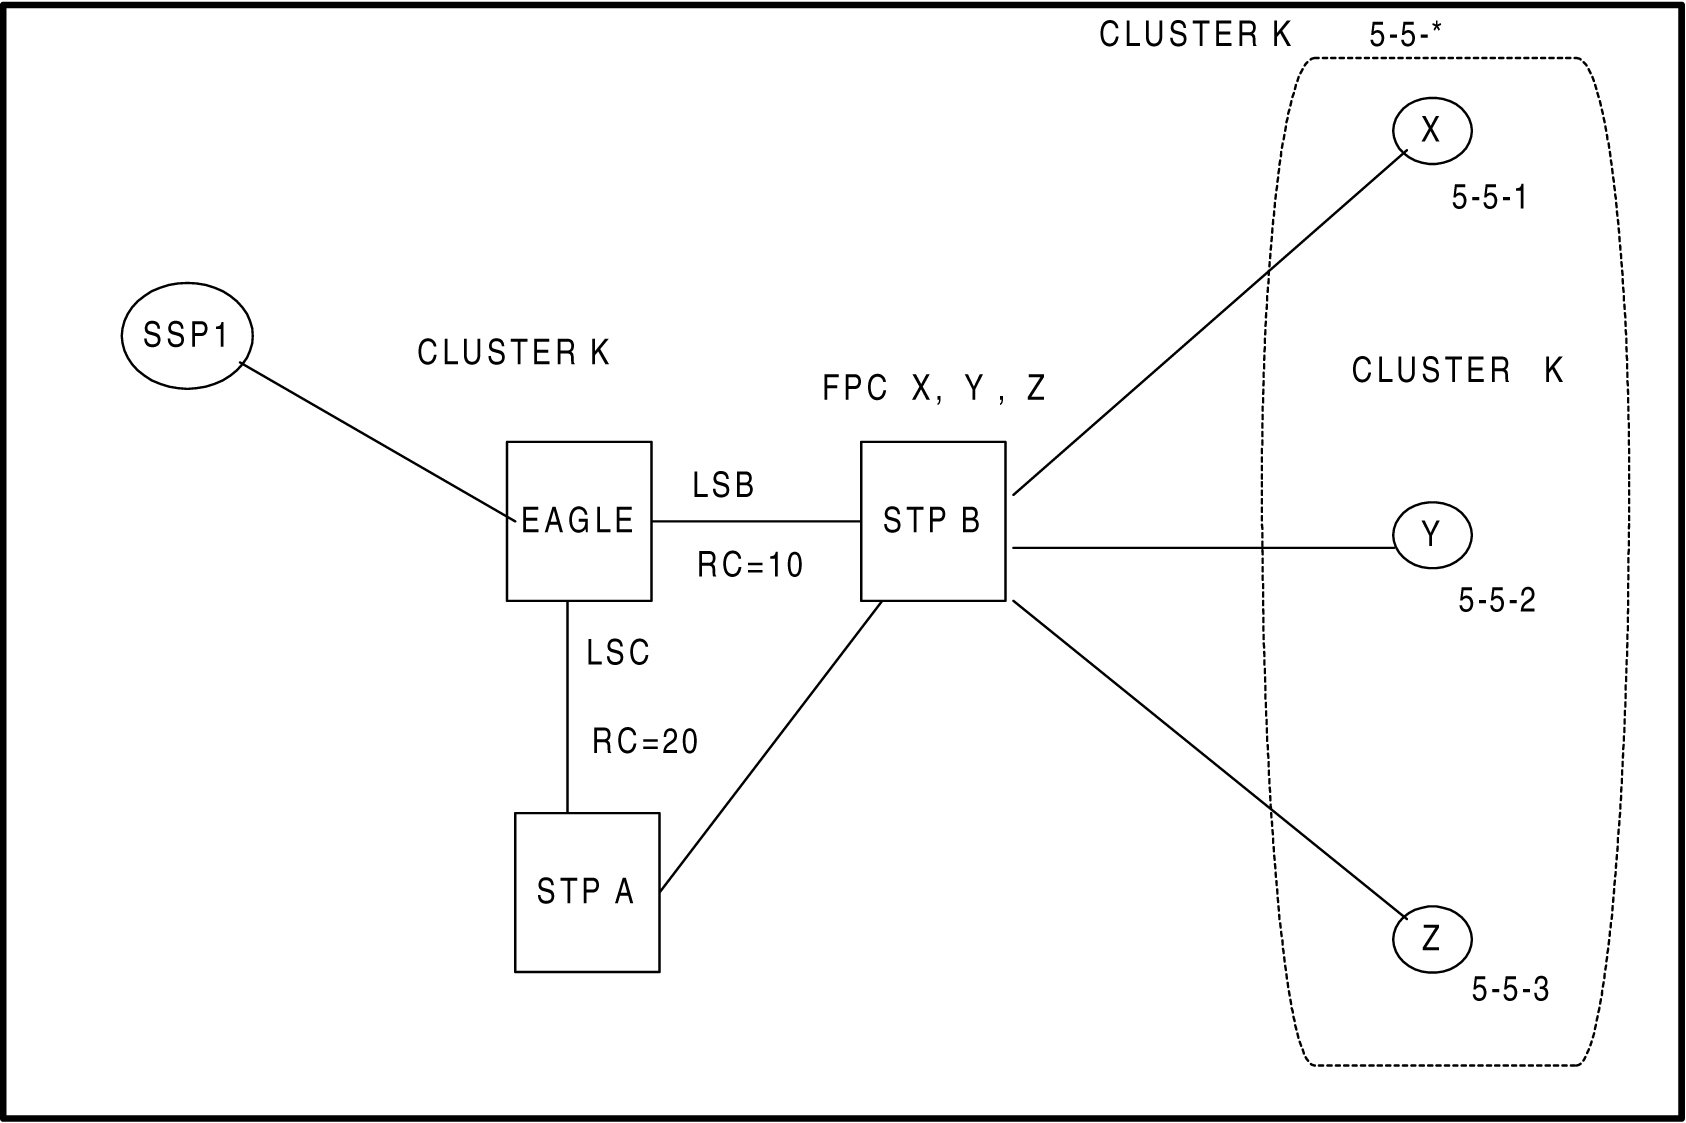 img/c_nested_cluster_routing_release_26_0_prf-fig3.jpg